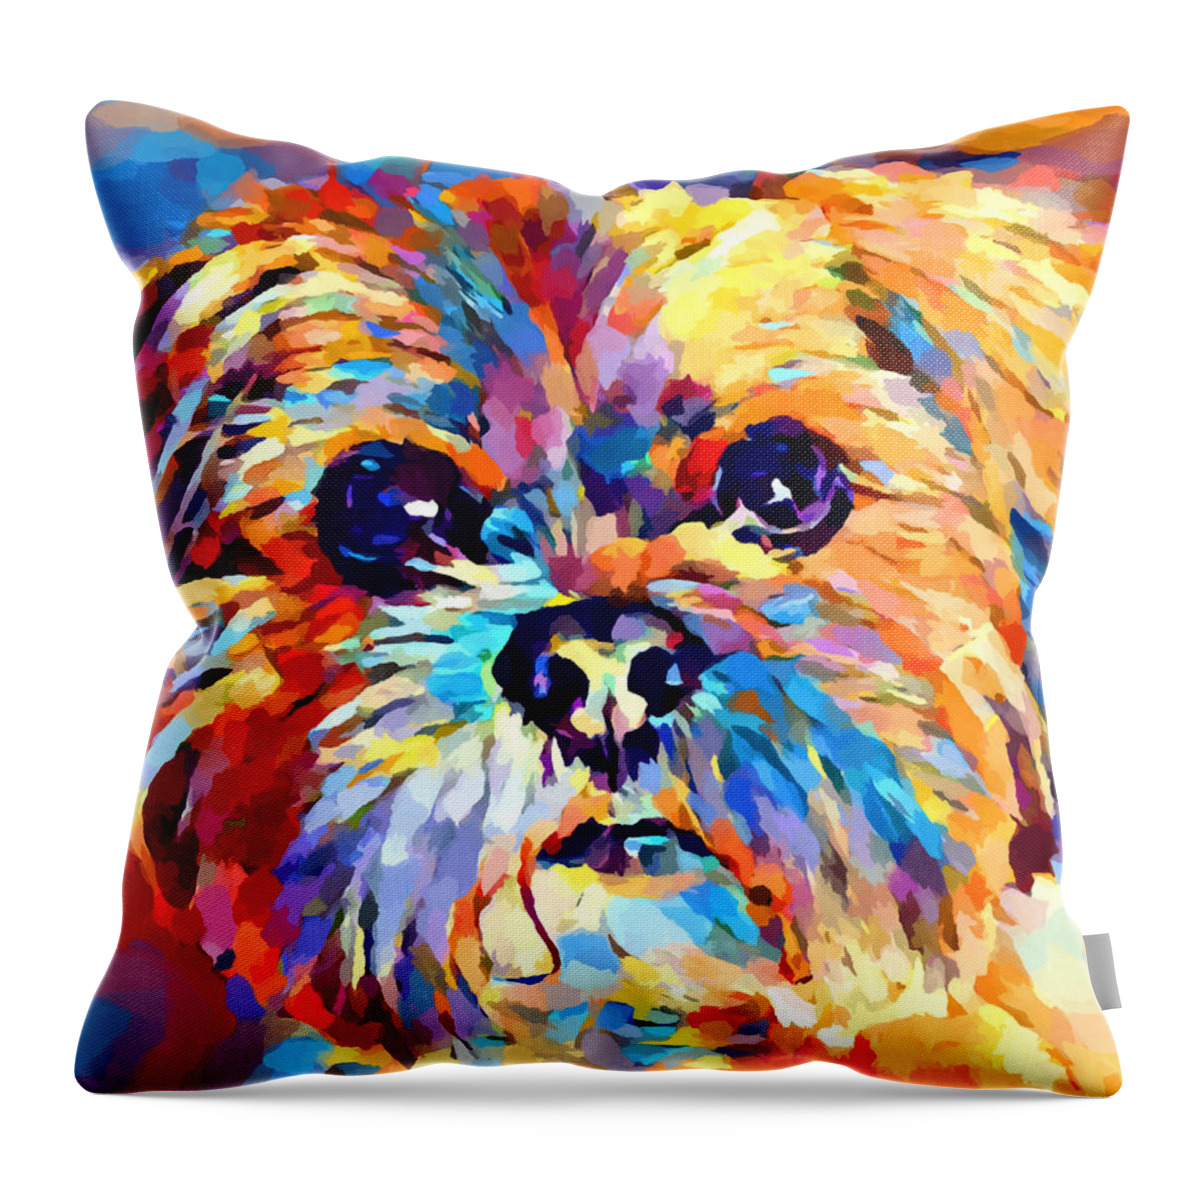 Lhasa Apso Throw Pillow featuring the painting Lhasa Apso 3 by Chris Butler